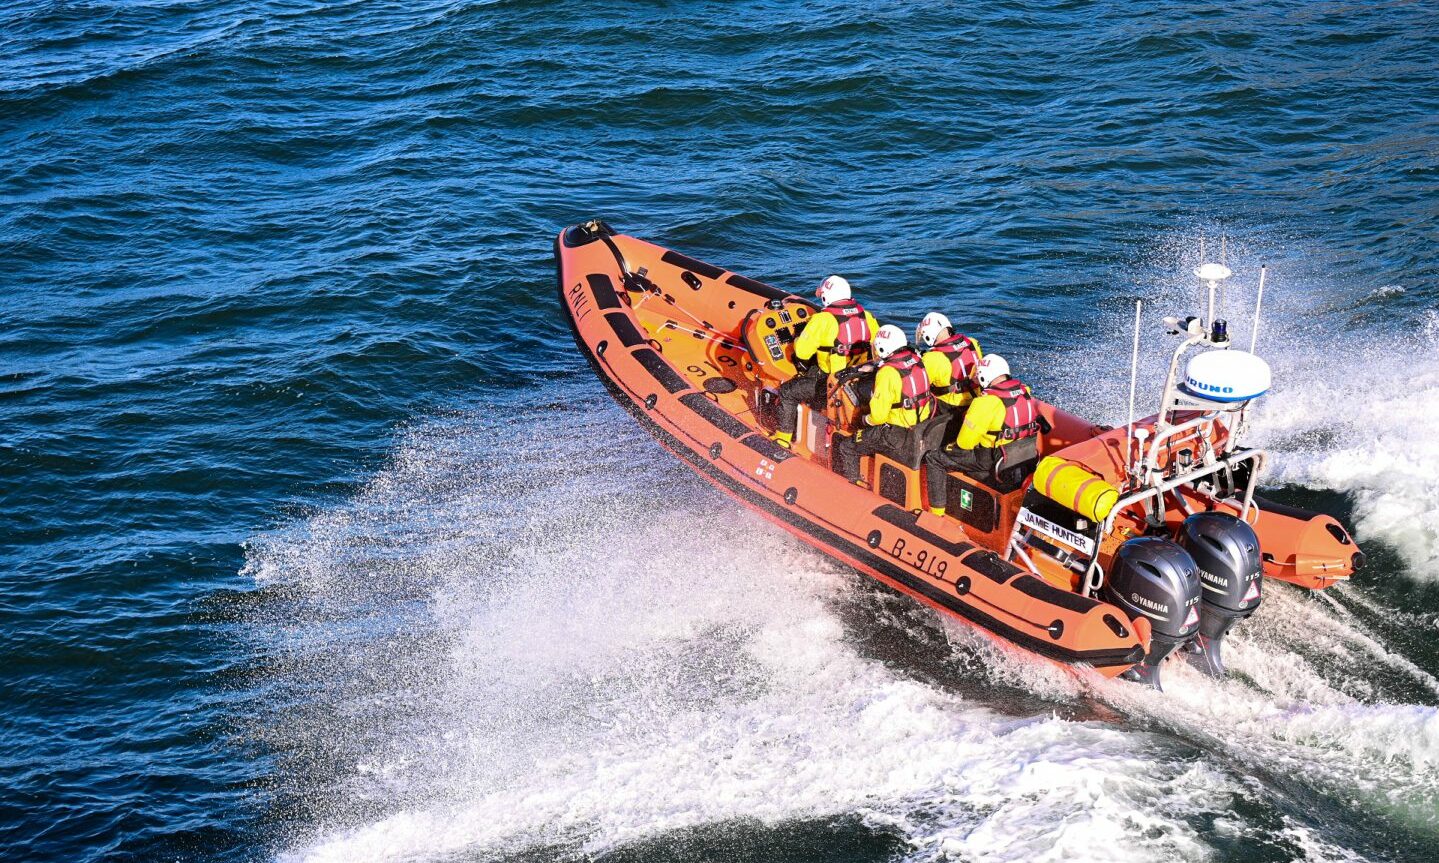 A crew in action on a life boat at sea